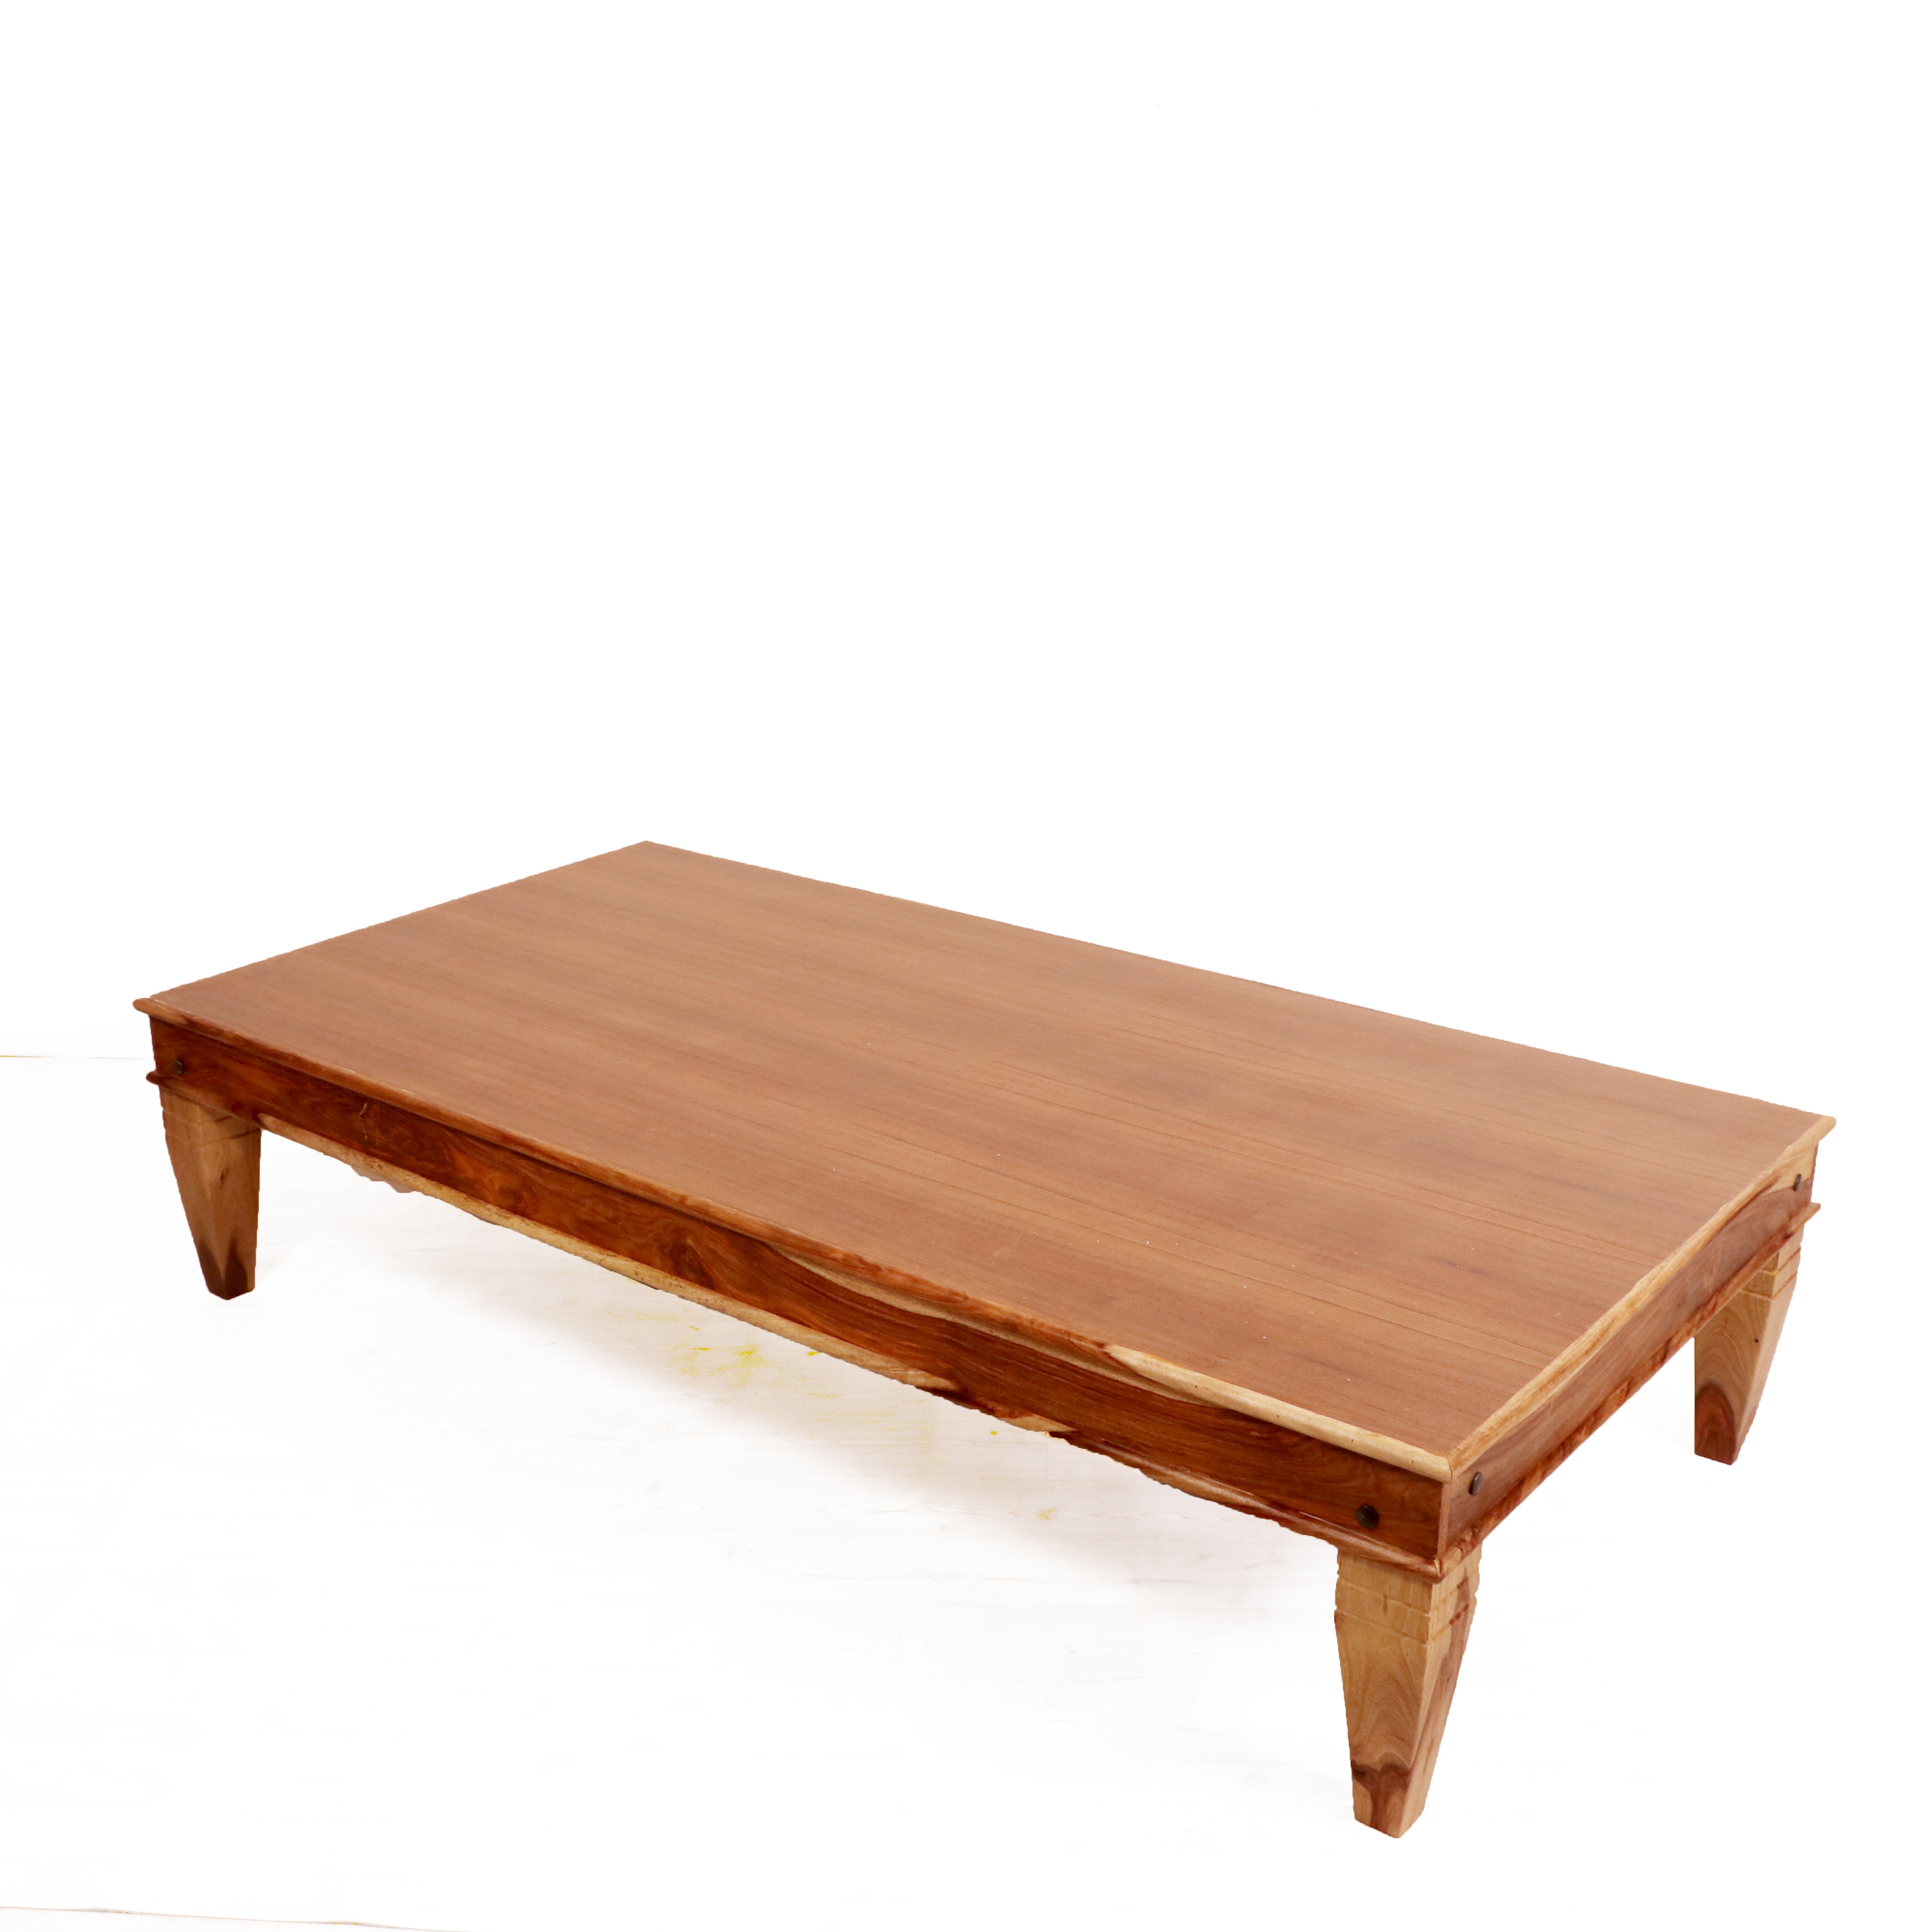 Sheesham wood legs with veneer Classical indian Paat Daybed